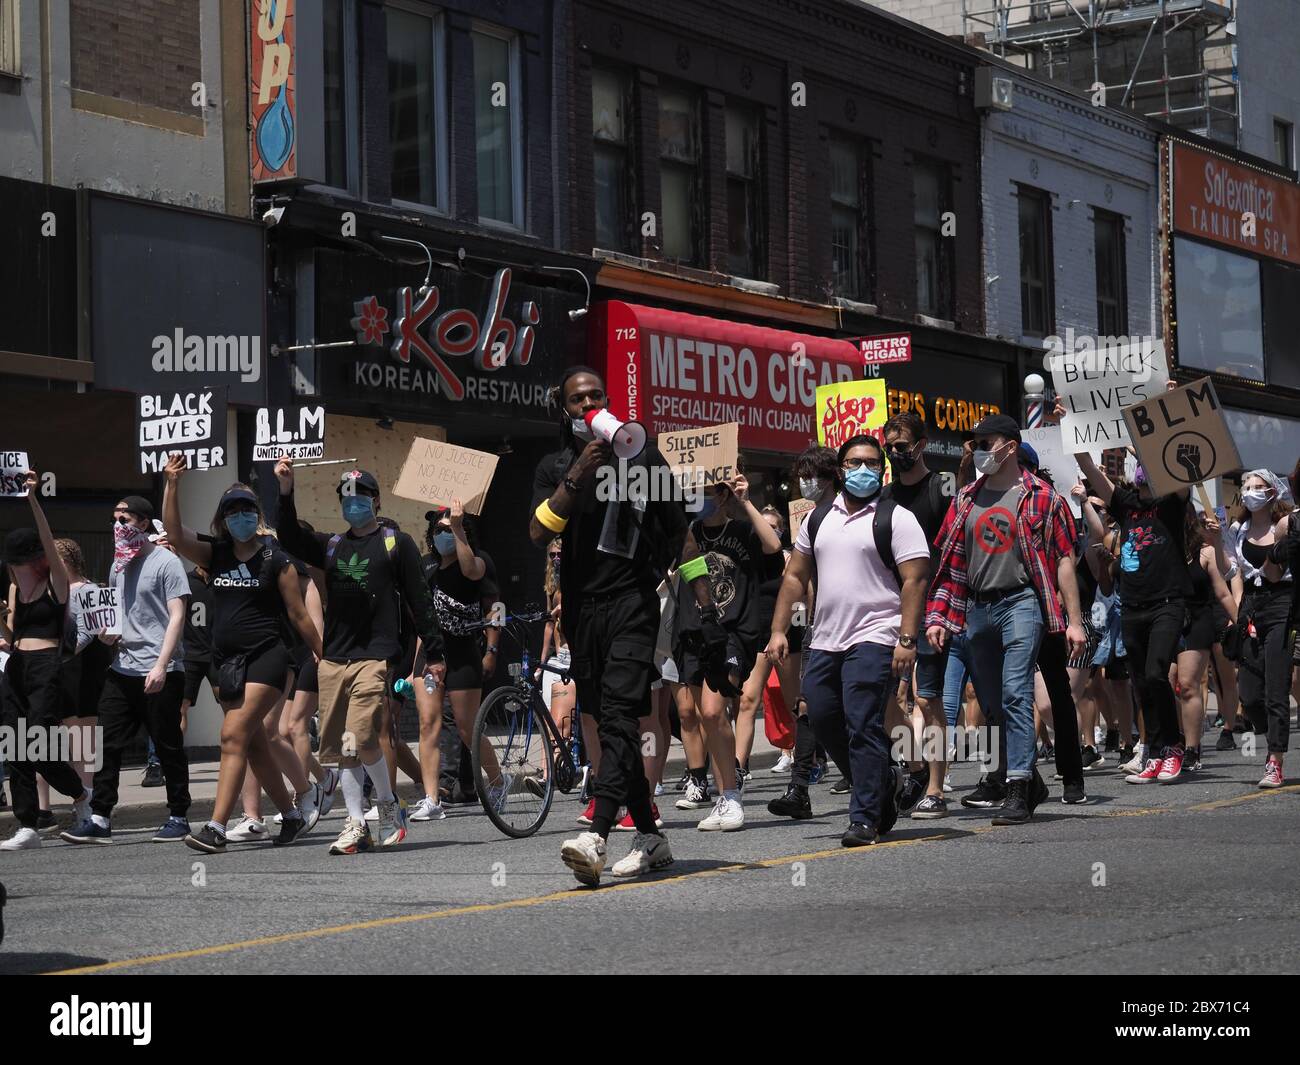 Toronto, Ontario, Canada. 5th June 2020. Black Lives Matter march through downtown Toronto in solidarity with protesters in the United States and around the world. Credit: Arlyn McAdorey/Alamy Live News. Stock Photo